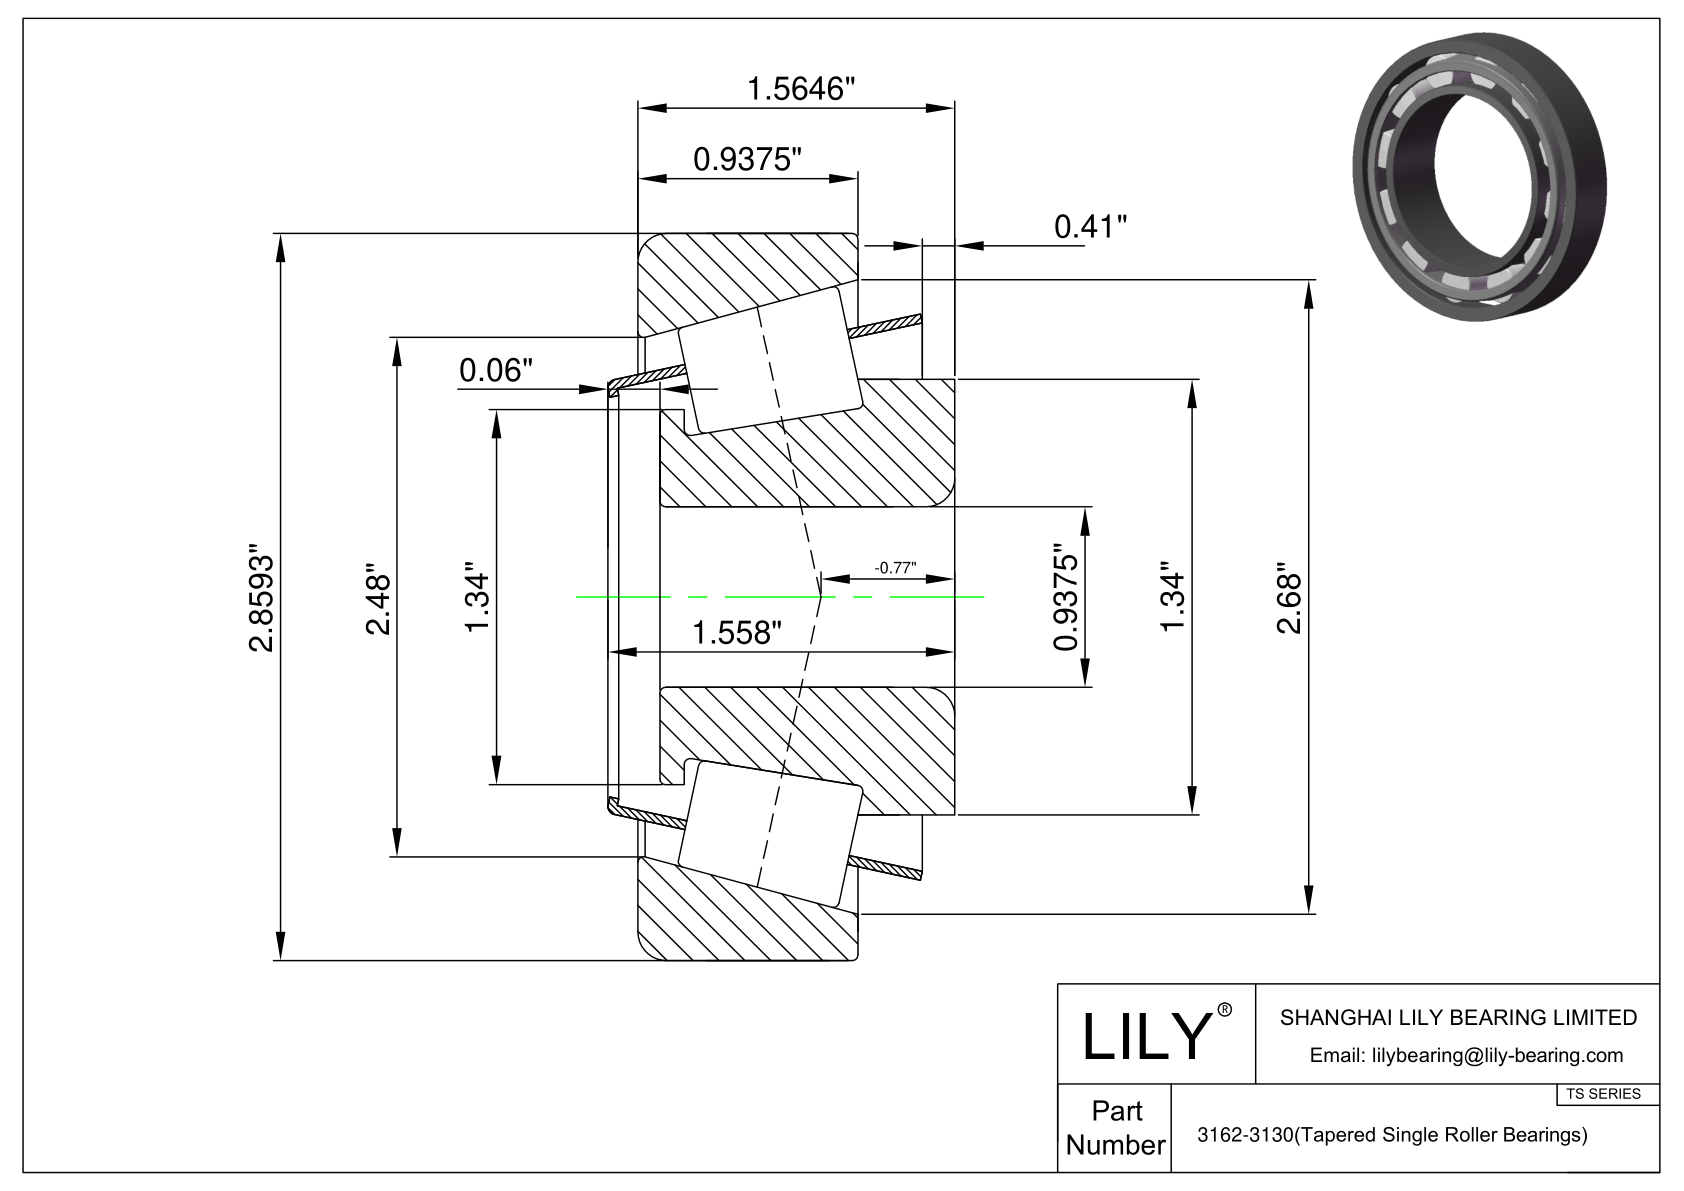 3162-3130 TS (Tapered Single Roller Bearings) (Imperial) cad drawing